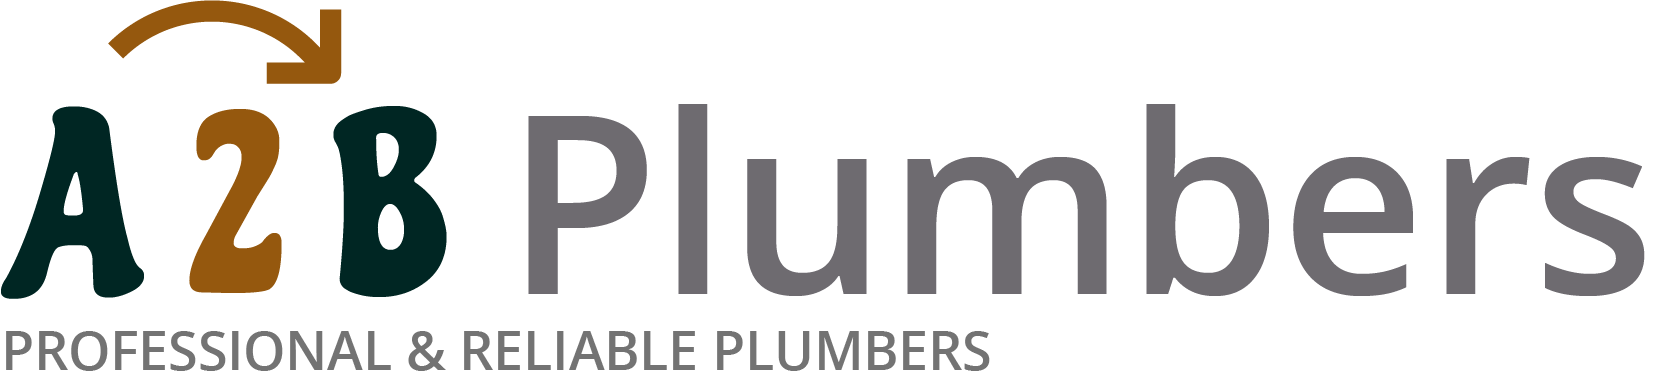 If you need a boiler installed, a radiator repaired or a leaking tap fixed, call us now - we provide services for properties in Cudworth and the local area.